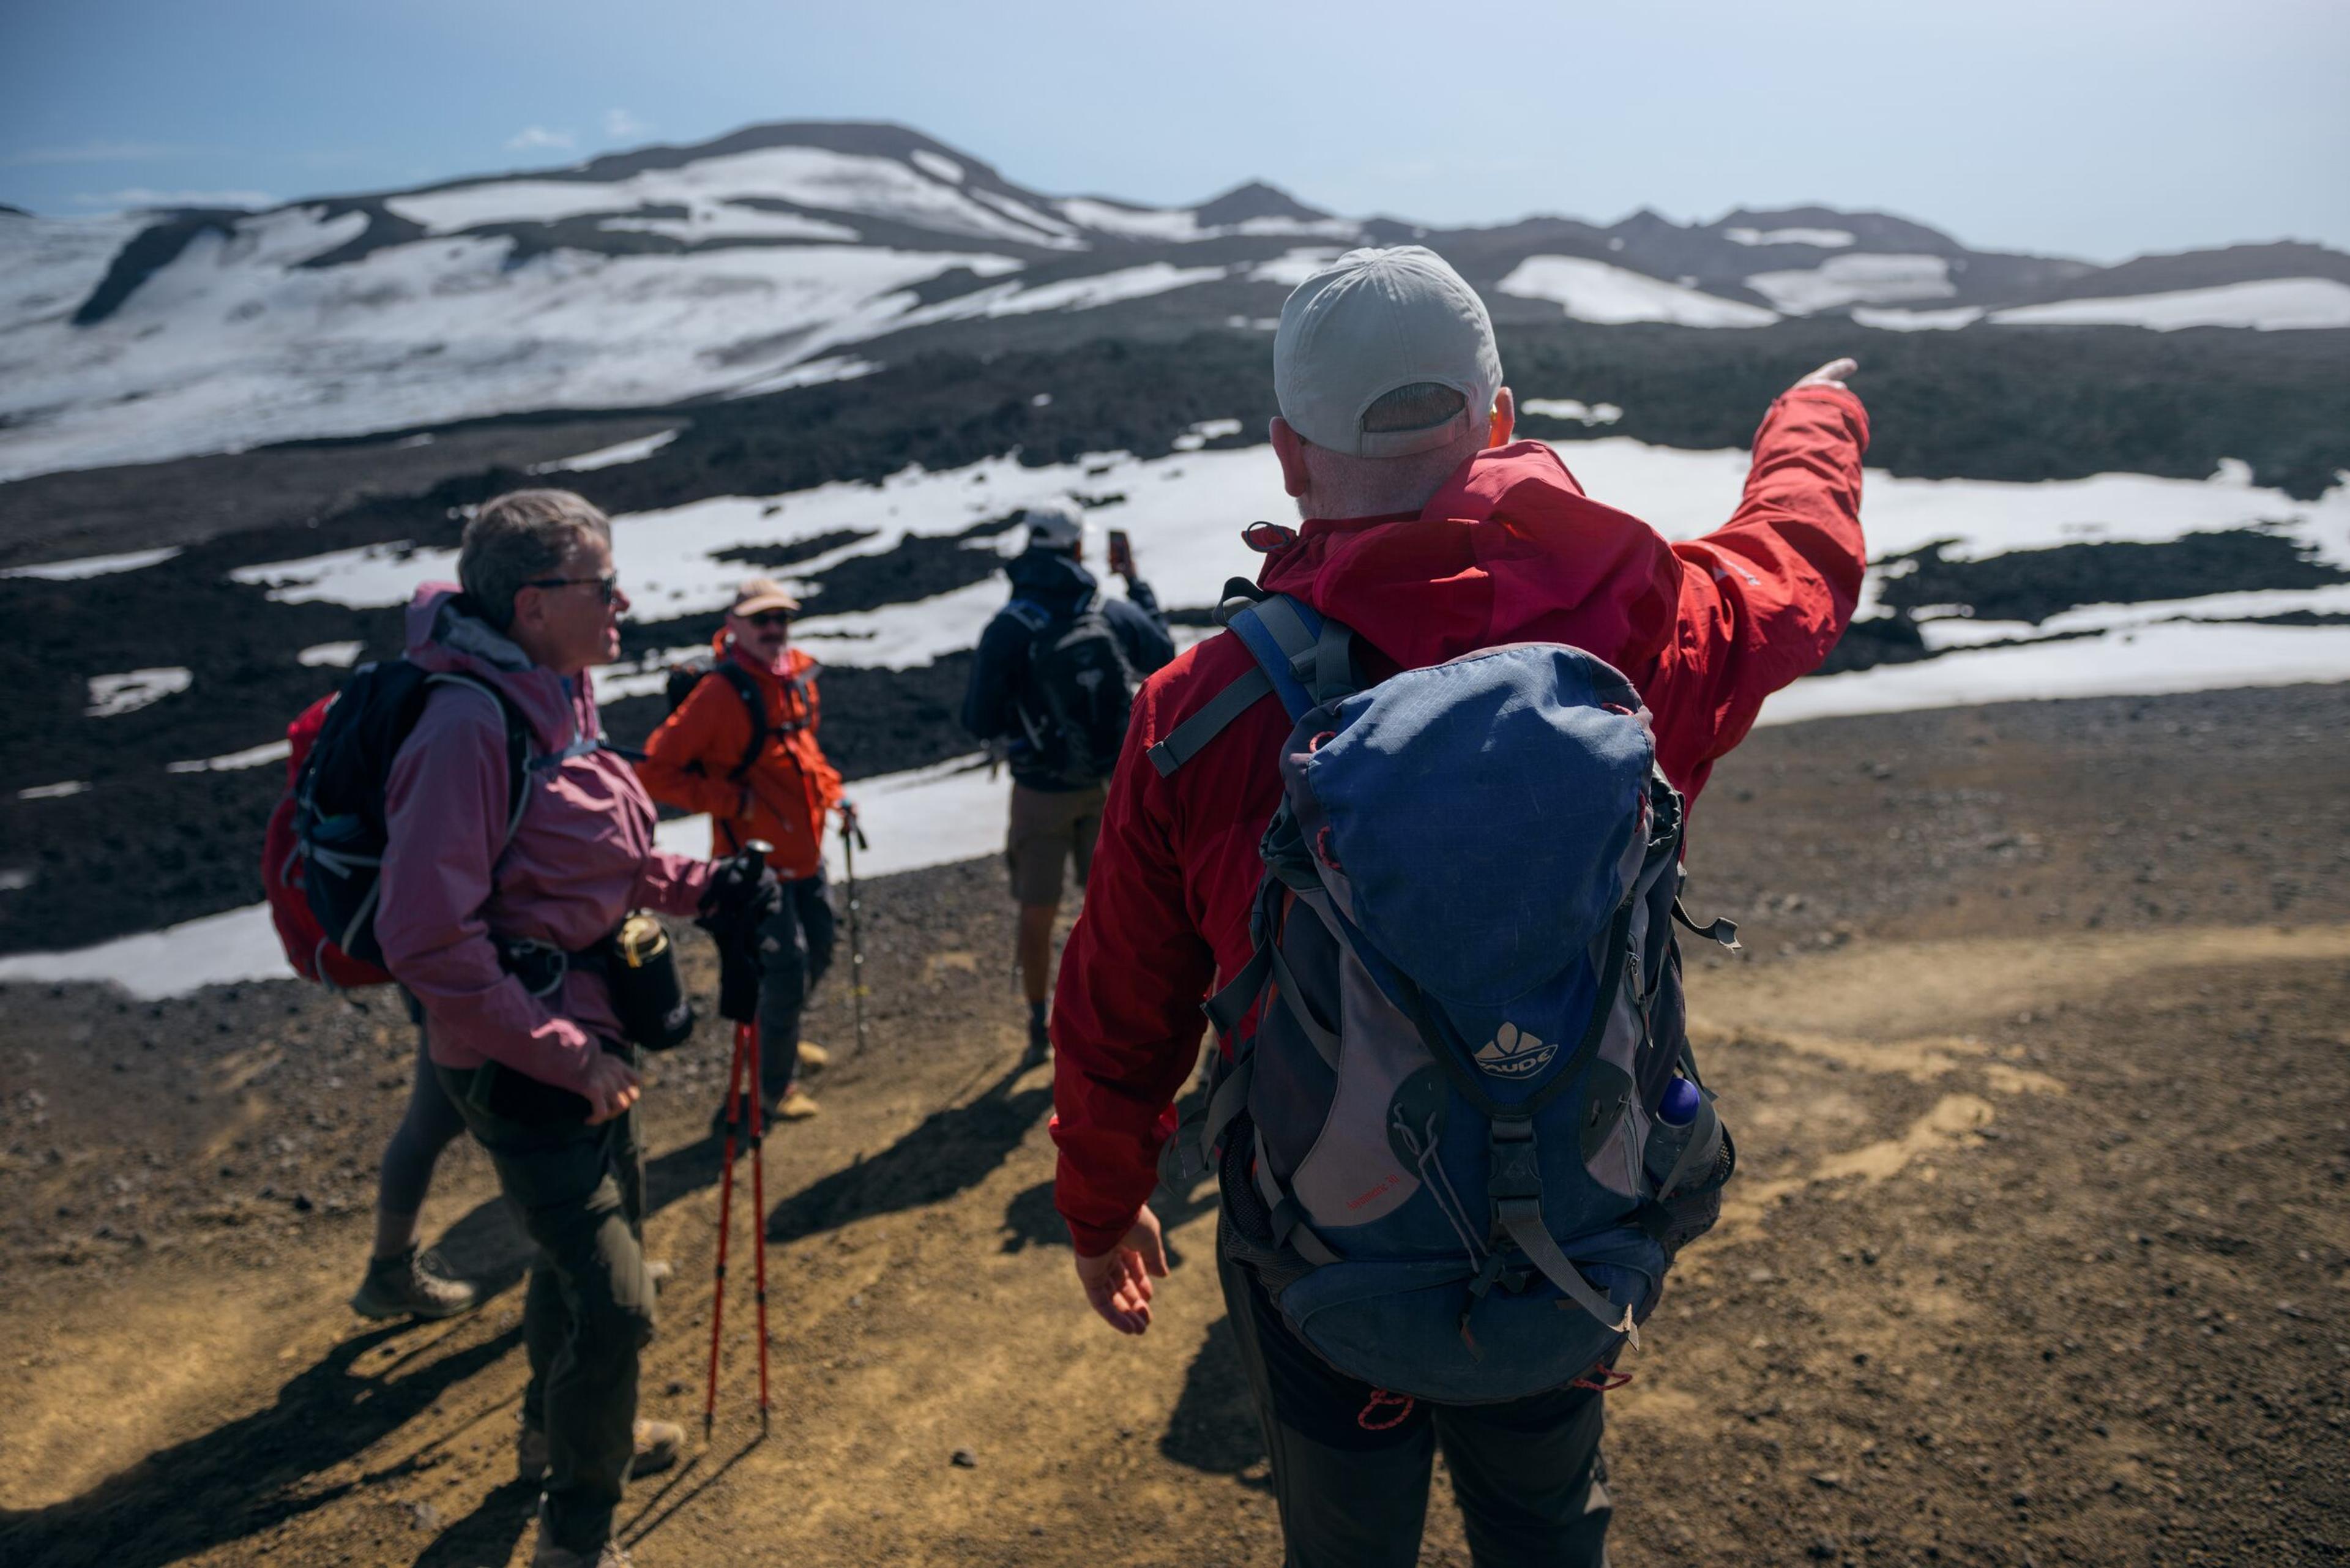 Hikers engaged in conversation while trekking the Laugavegur trail.